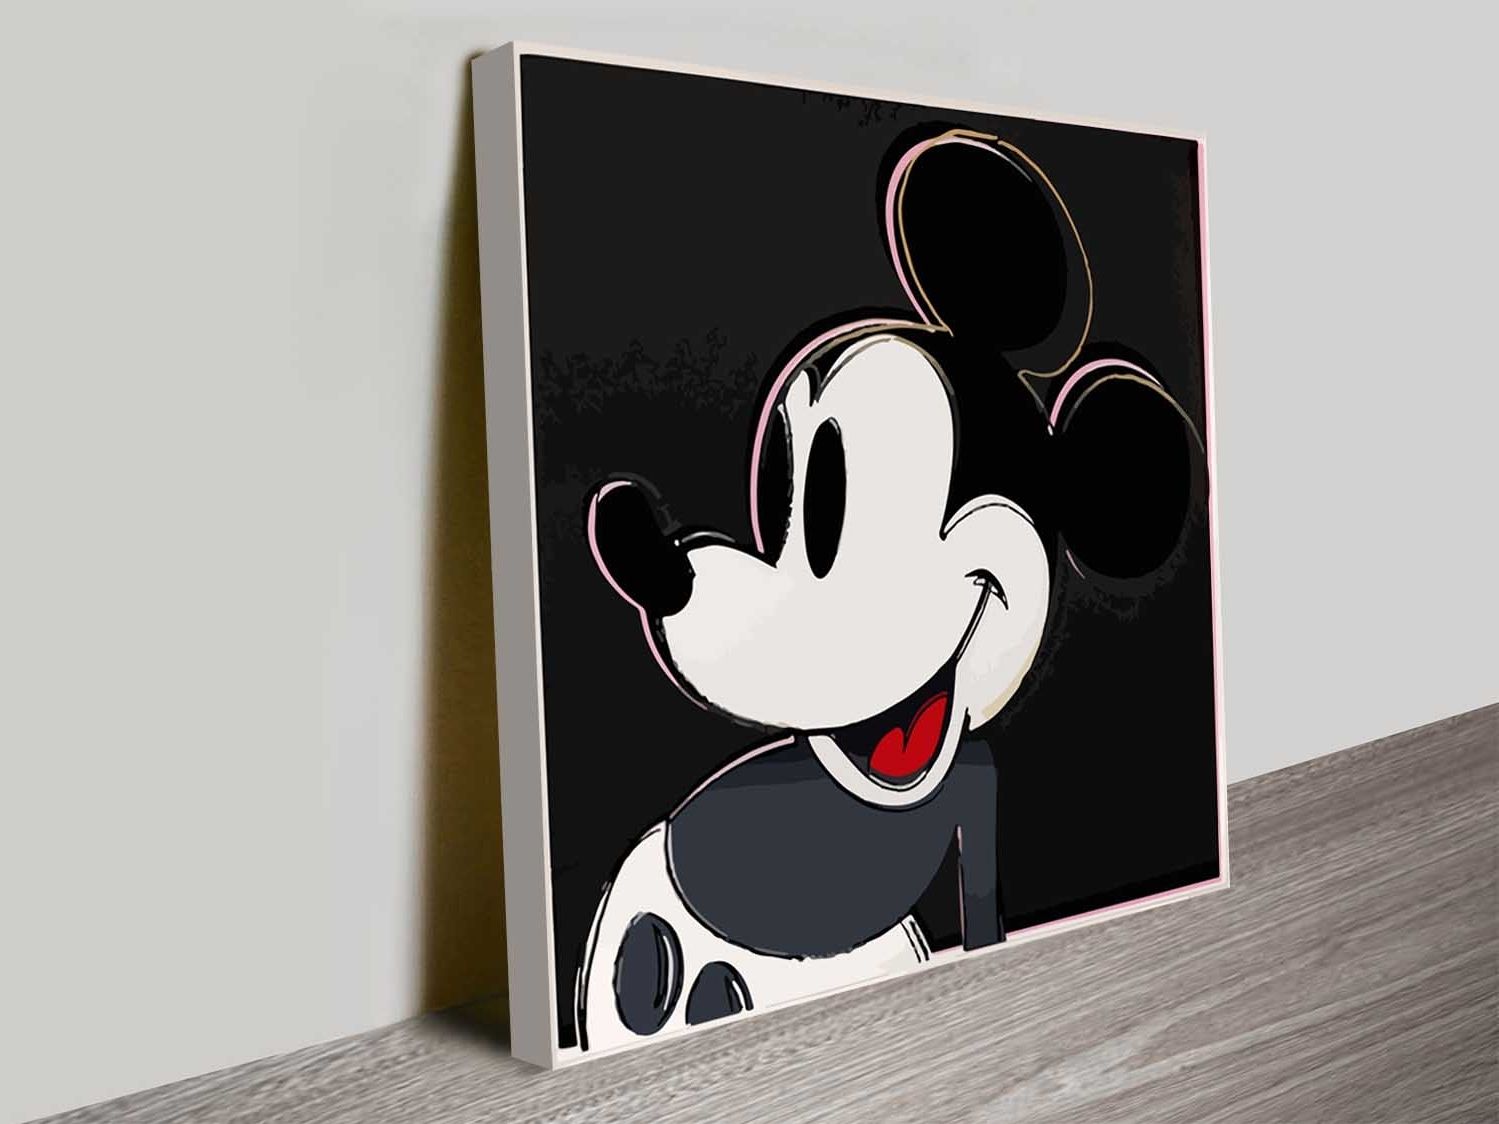 Mickey Mouseandy Warhol Iconic Pop Art Wall Canvas Pertaining To Current Mickey Mouse Canvas Wall Art (View 3 of 15)